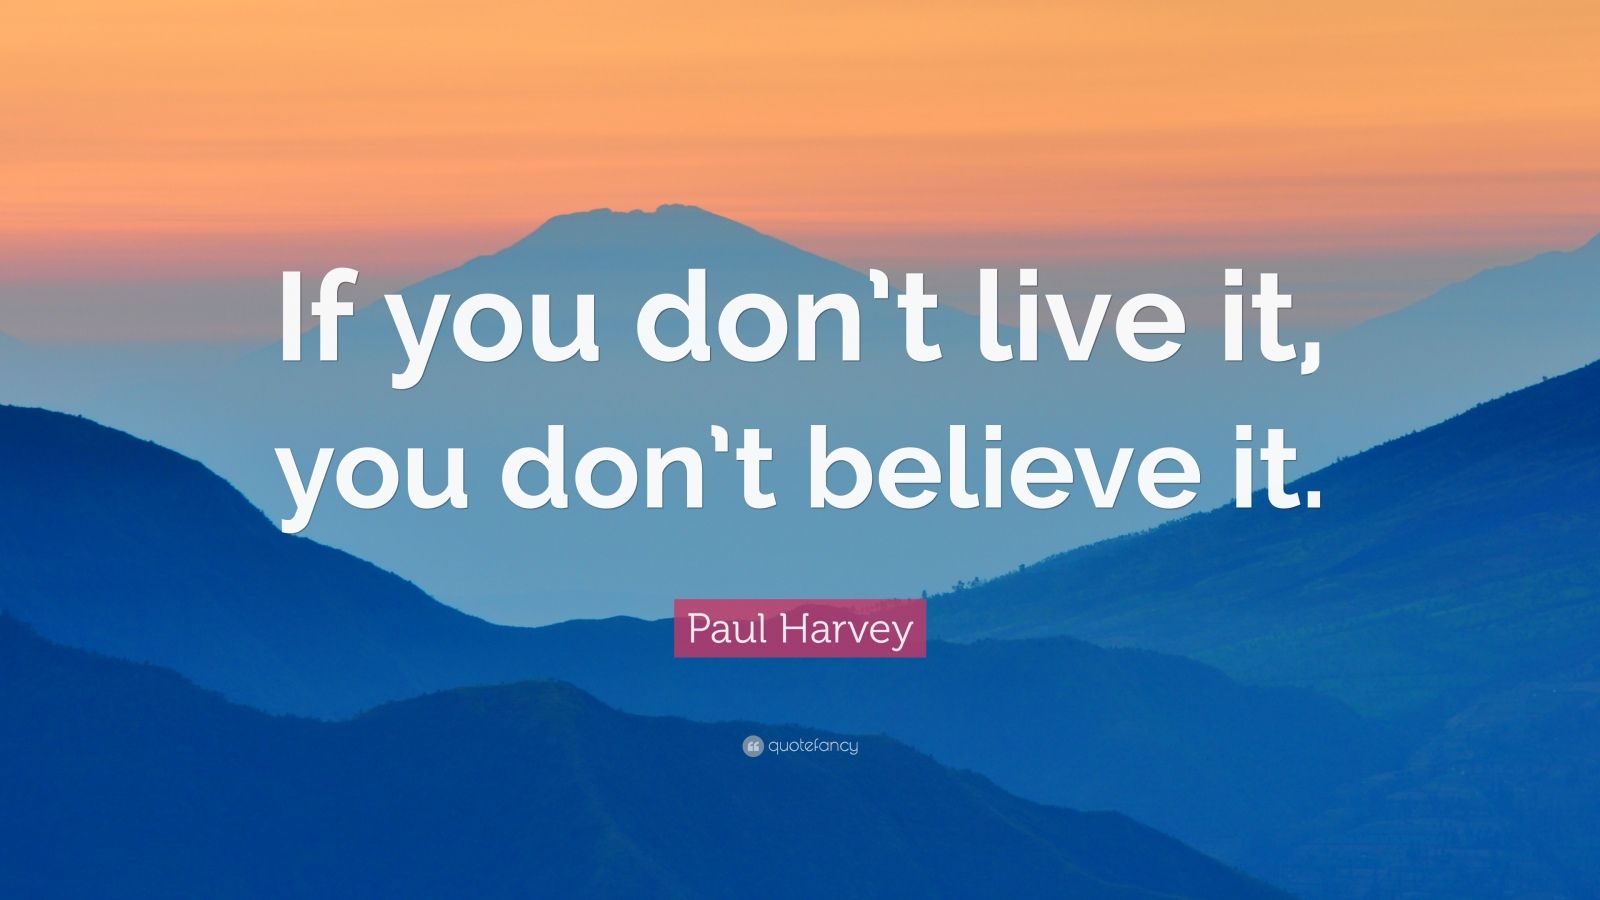 Paul Harvey Quote: “If you don’t live it, you don’t believe it.”